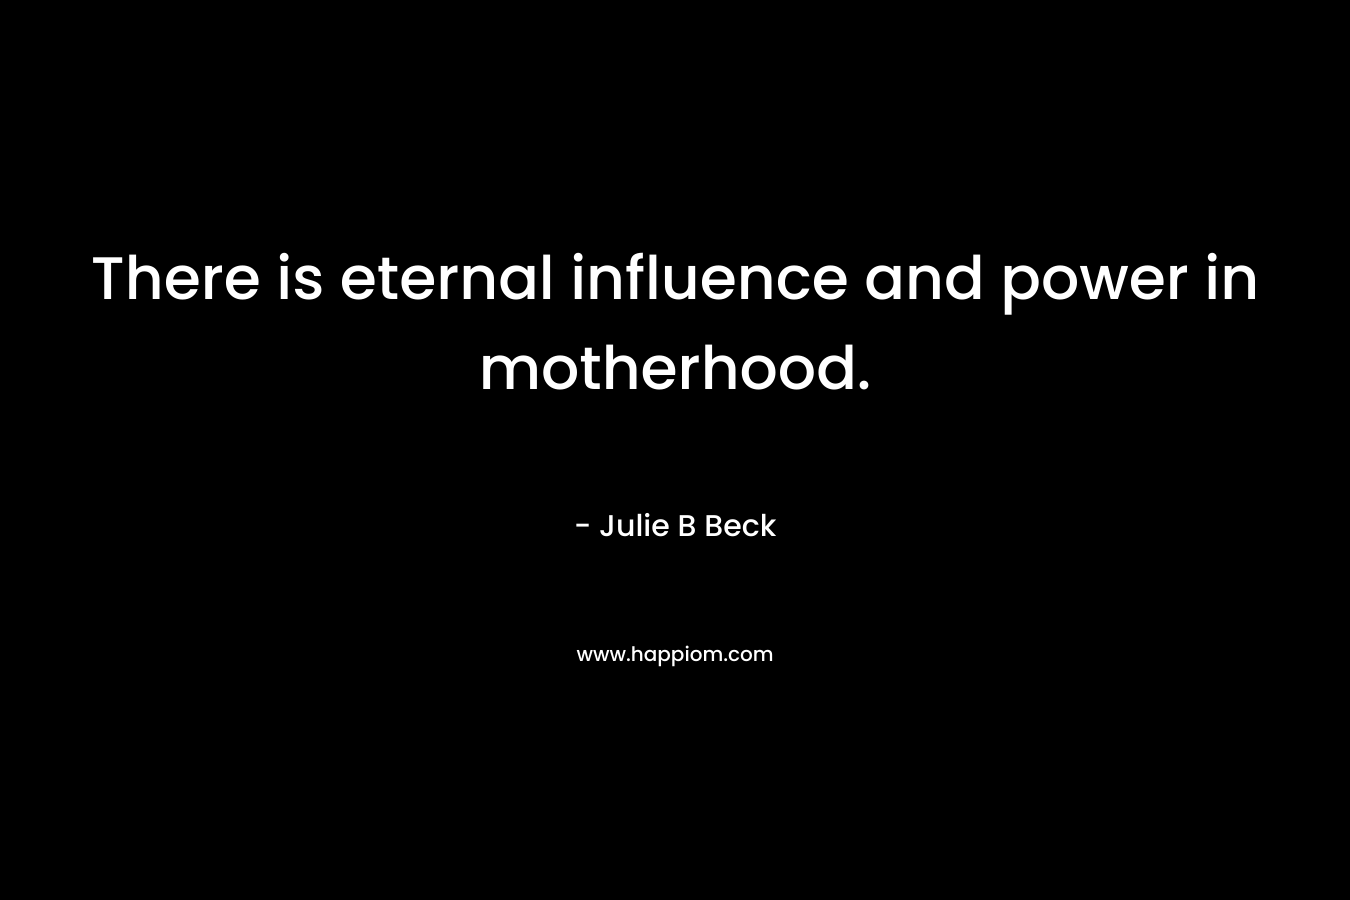 There is eternal influence and power in motherhood. – Julie B Beck